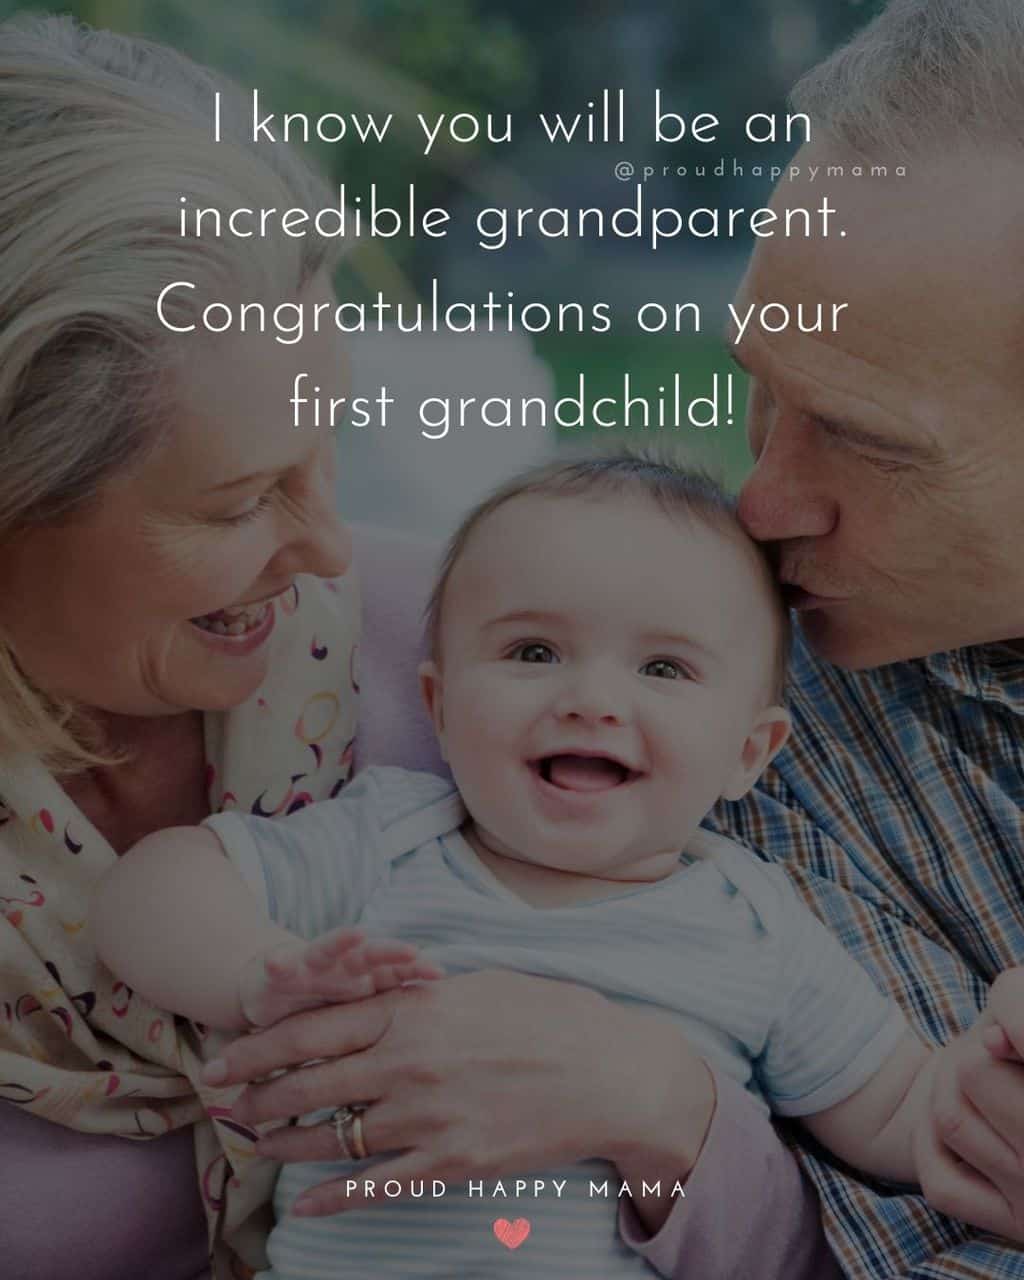 Grandparent Quotes – I know you will be an incredible grandparent. Congratulations on your first grandchild!’